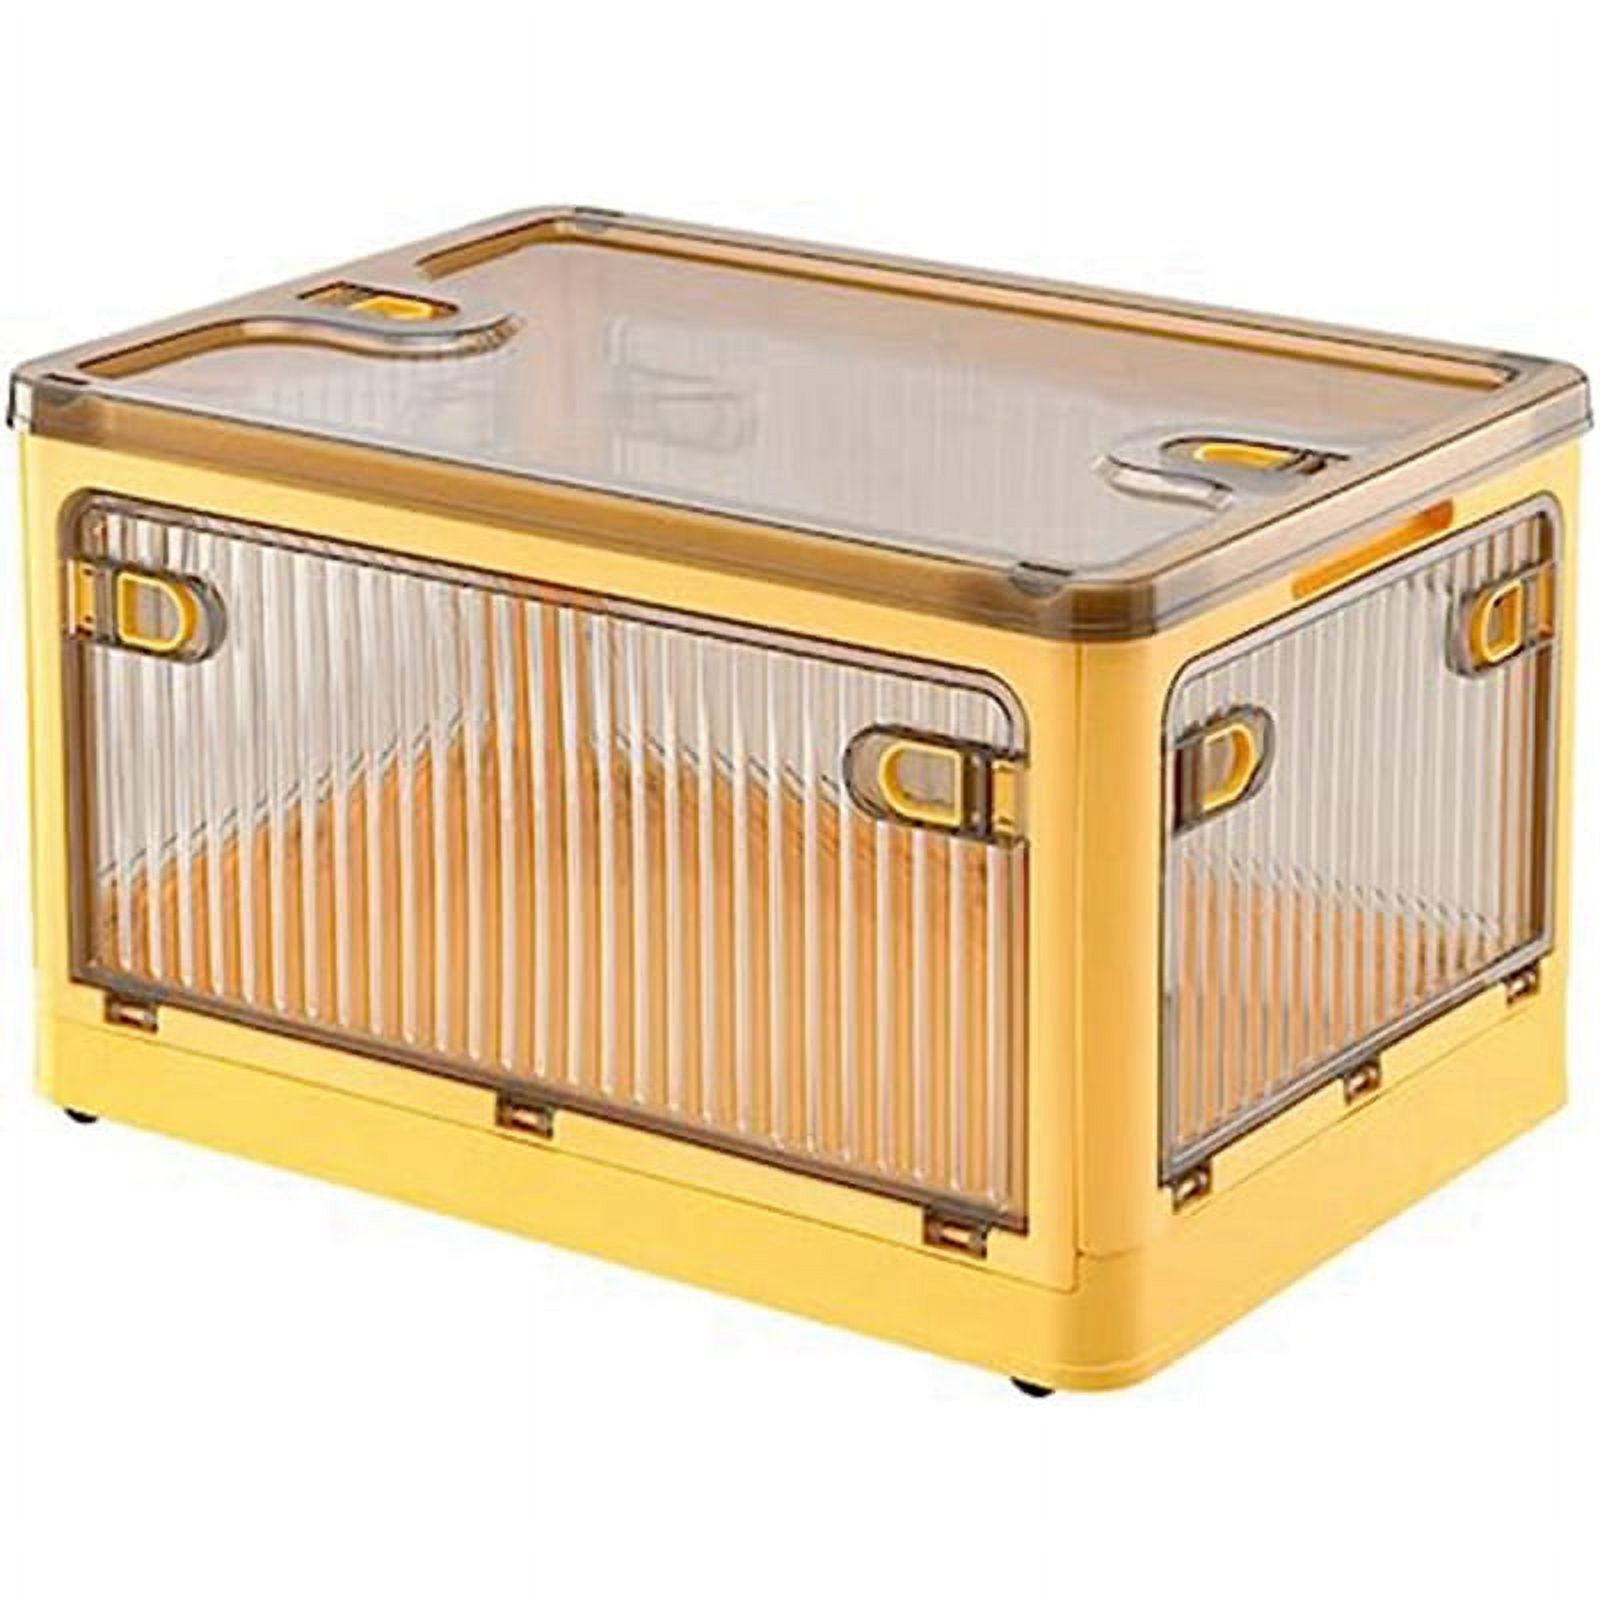 China Folding Storage Box with Lid and Latch,Clear Stackable Storage Bins with Wheels, Storage Boxes for Organizing Clothes, Yellow